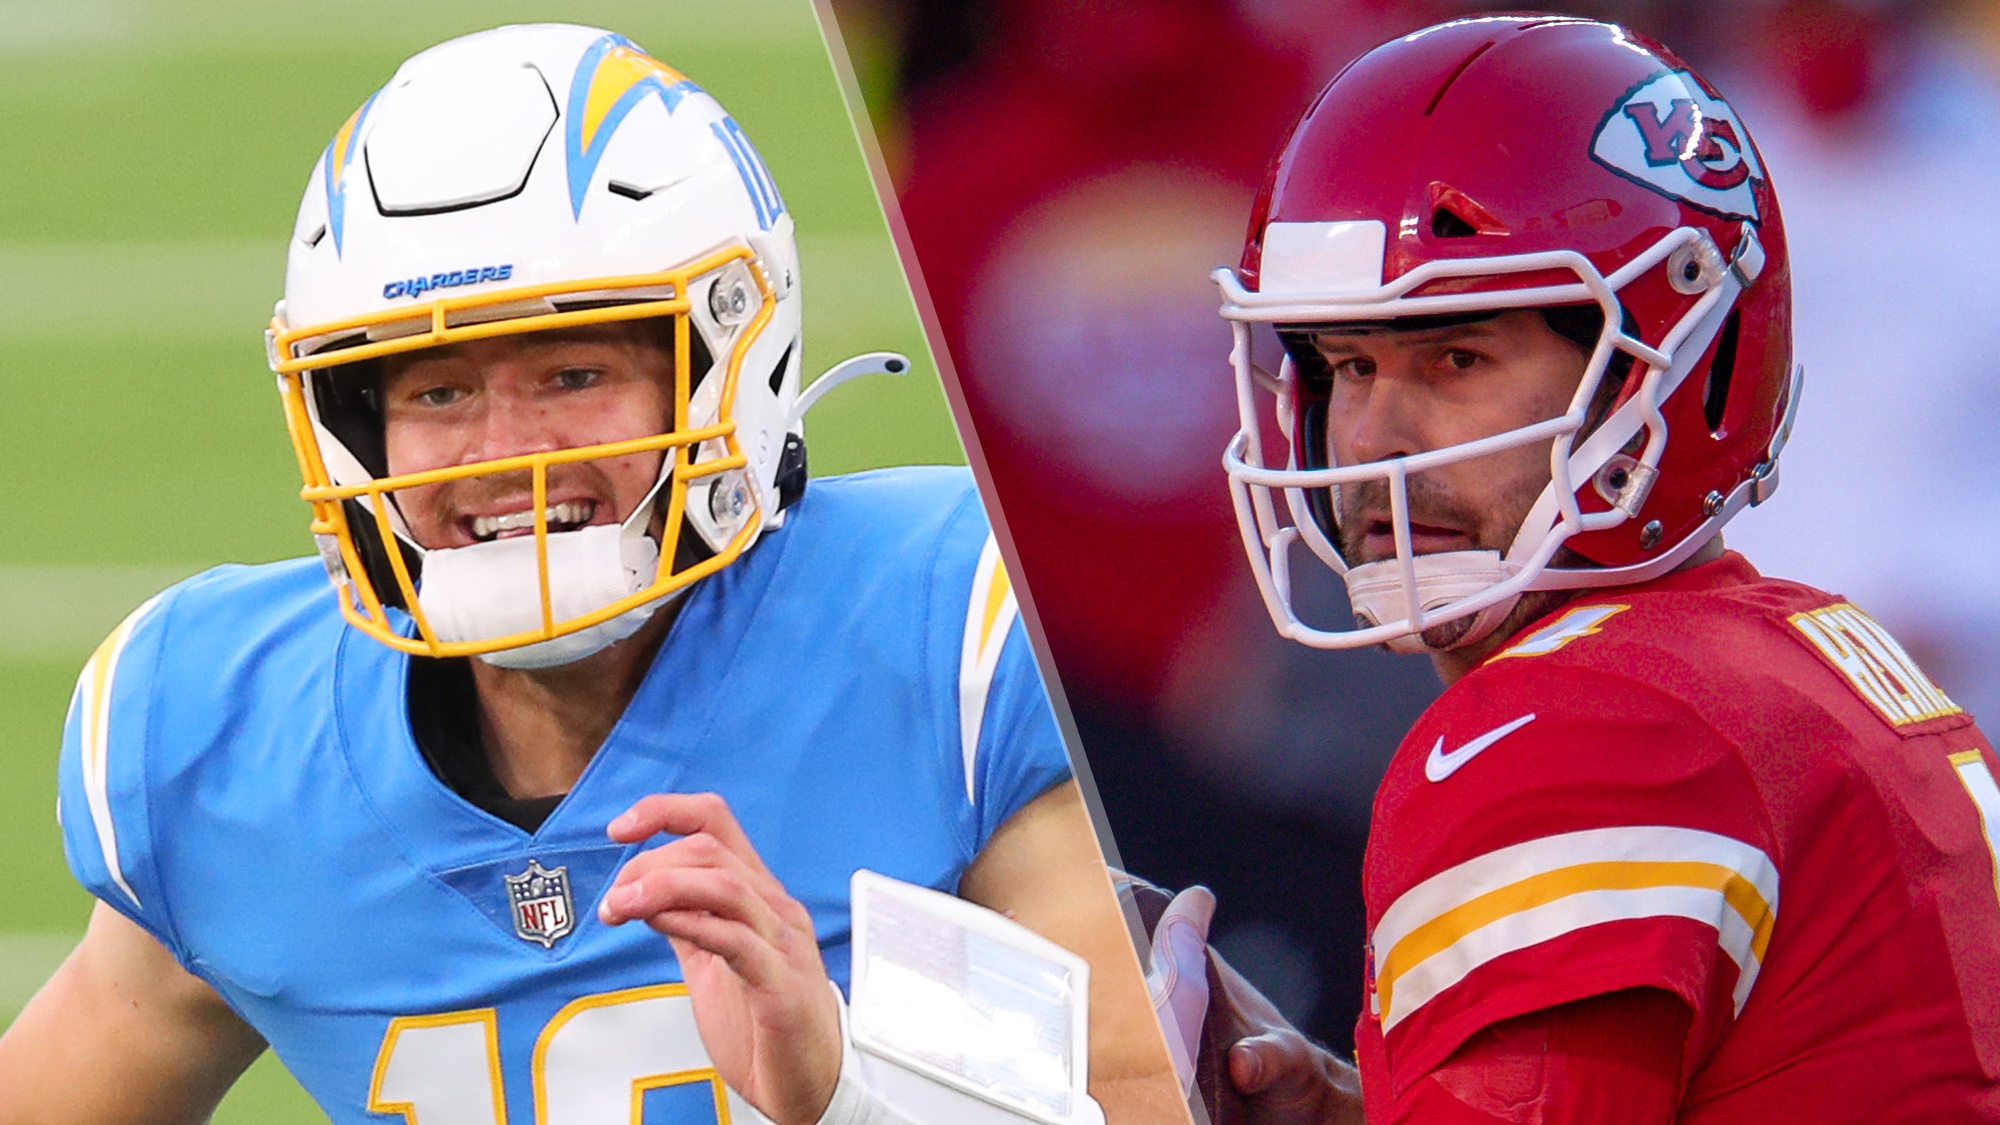 chiefs and chargers live